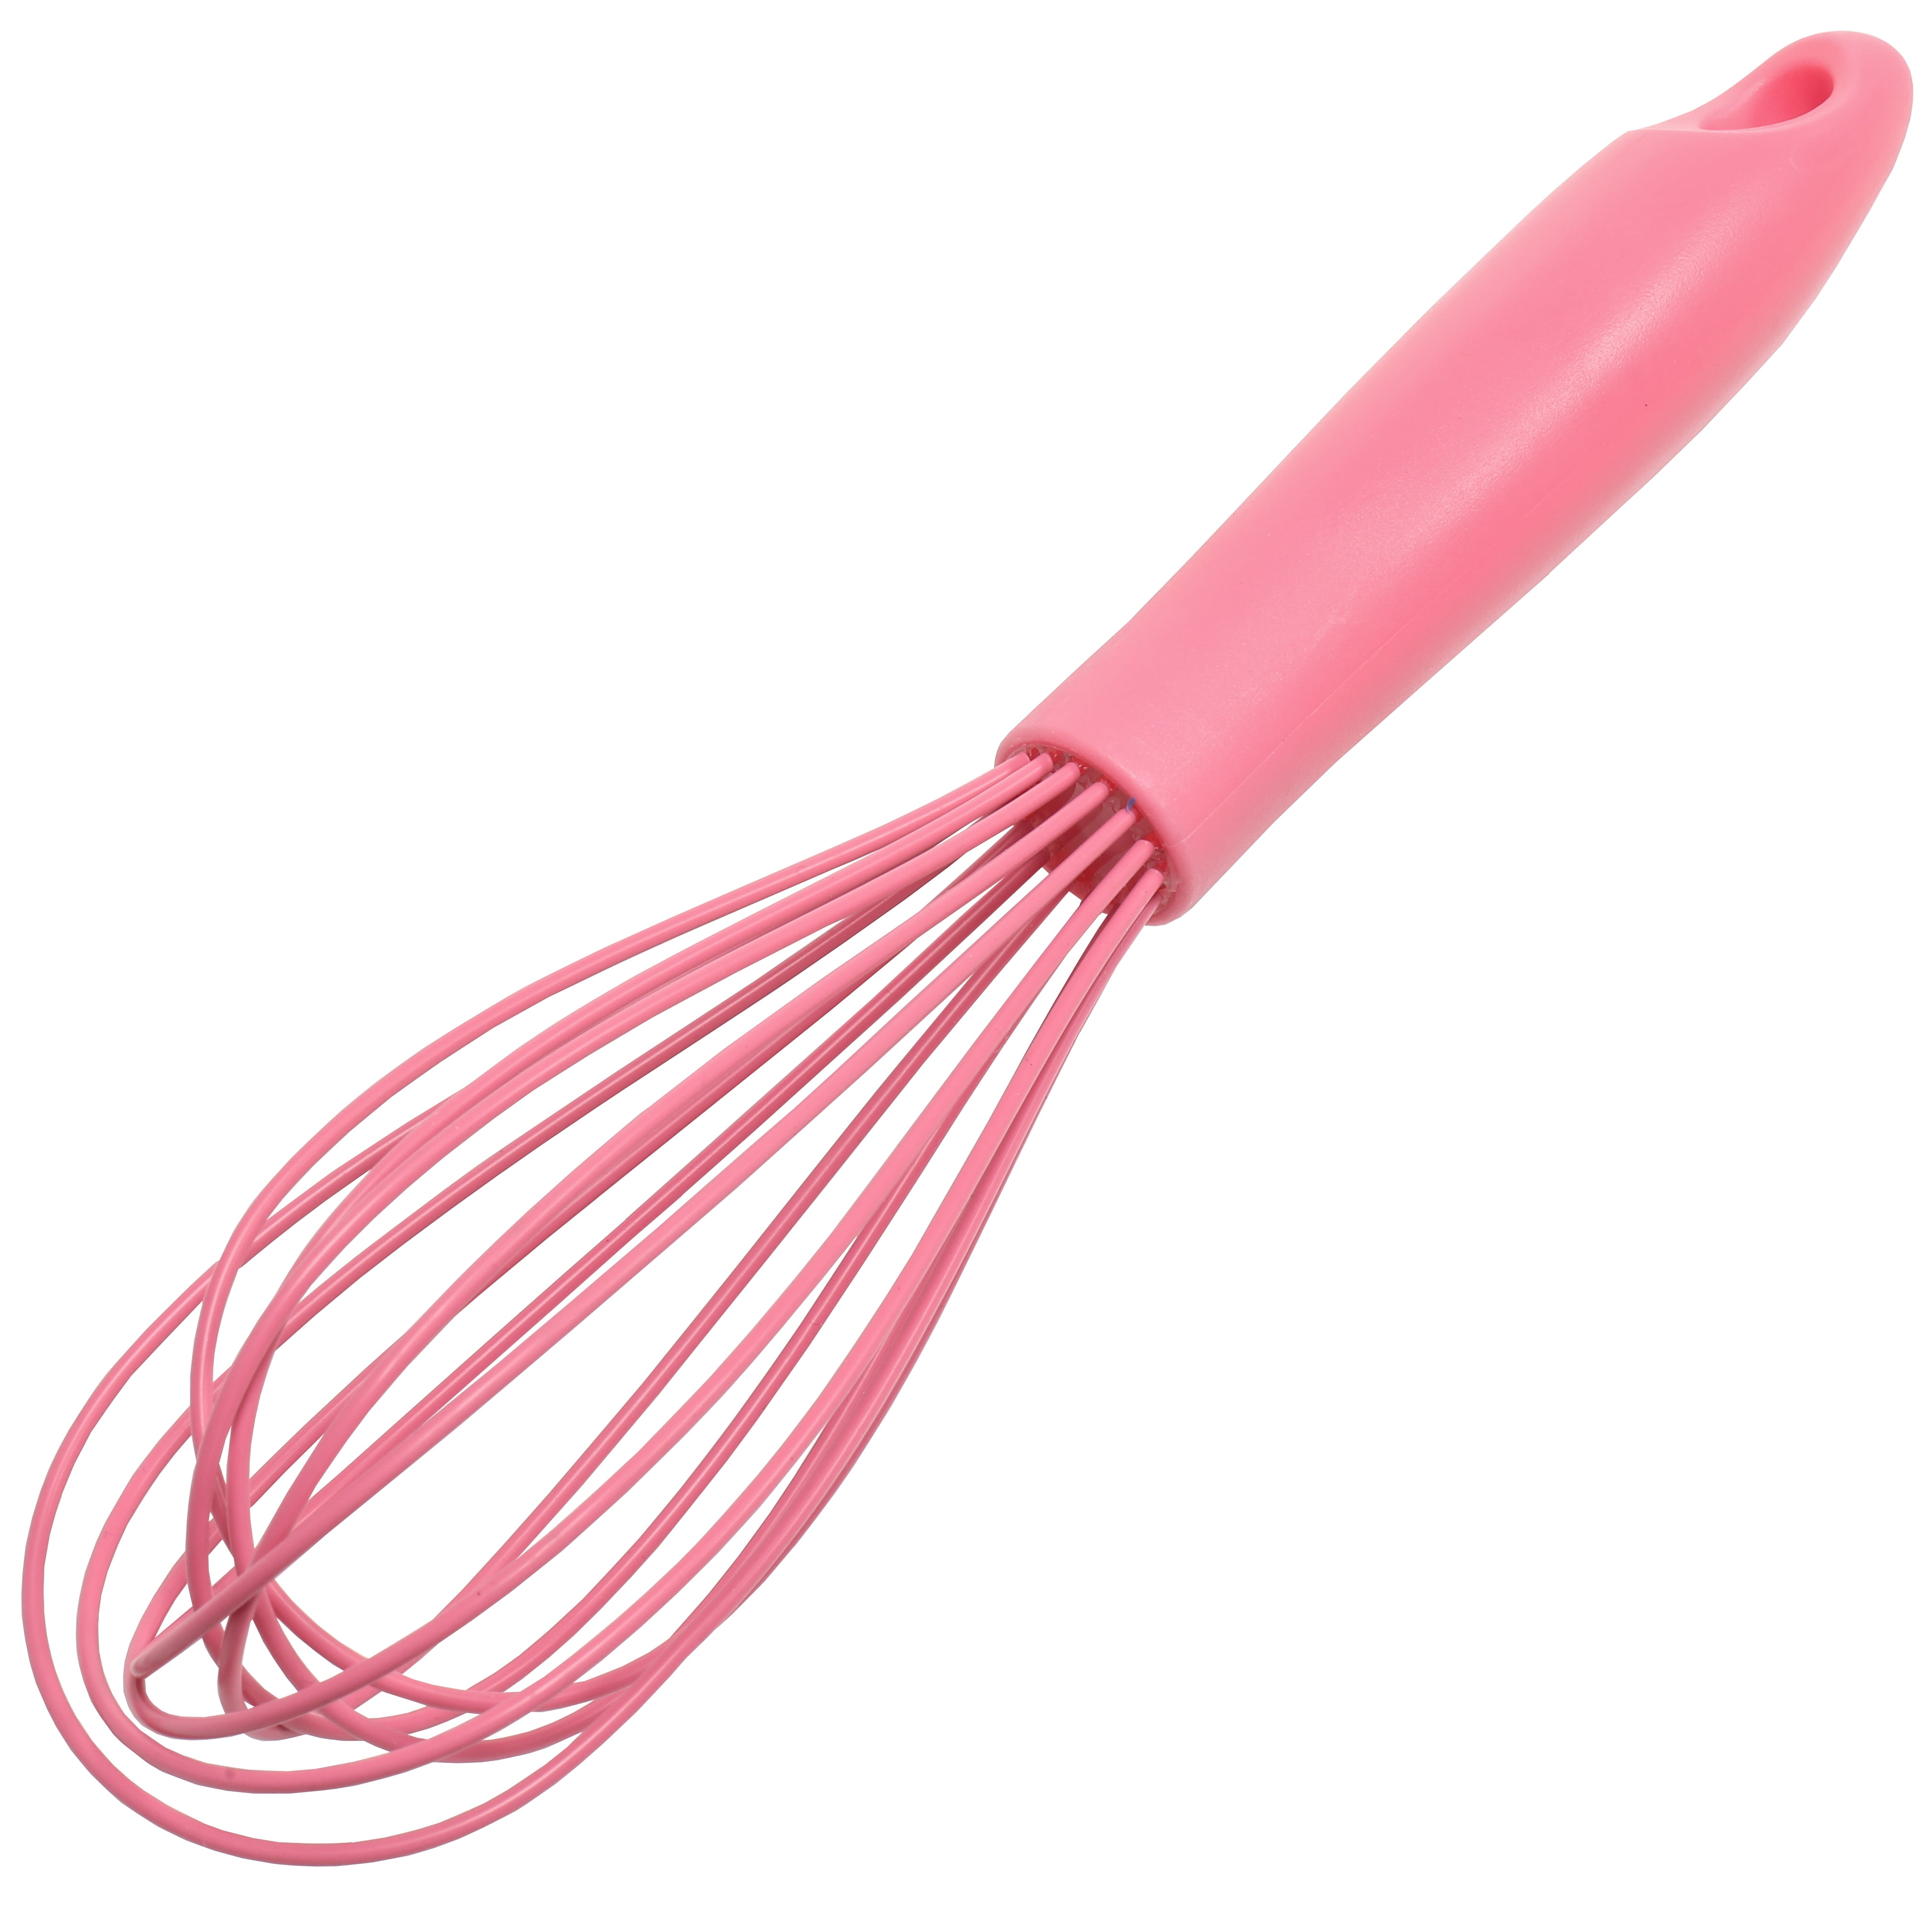 Pampered Chef Wire Whisk for Baking & Cooking 